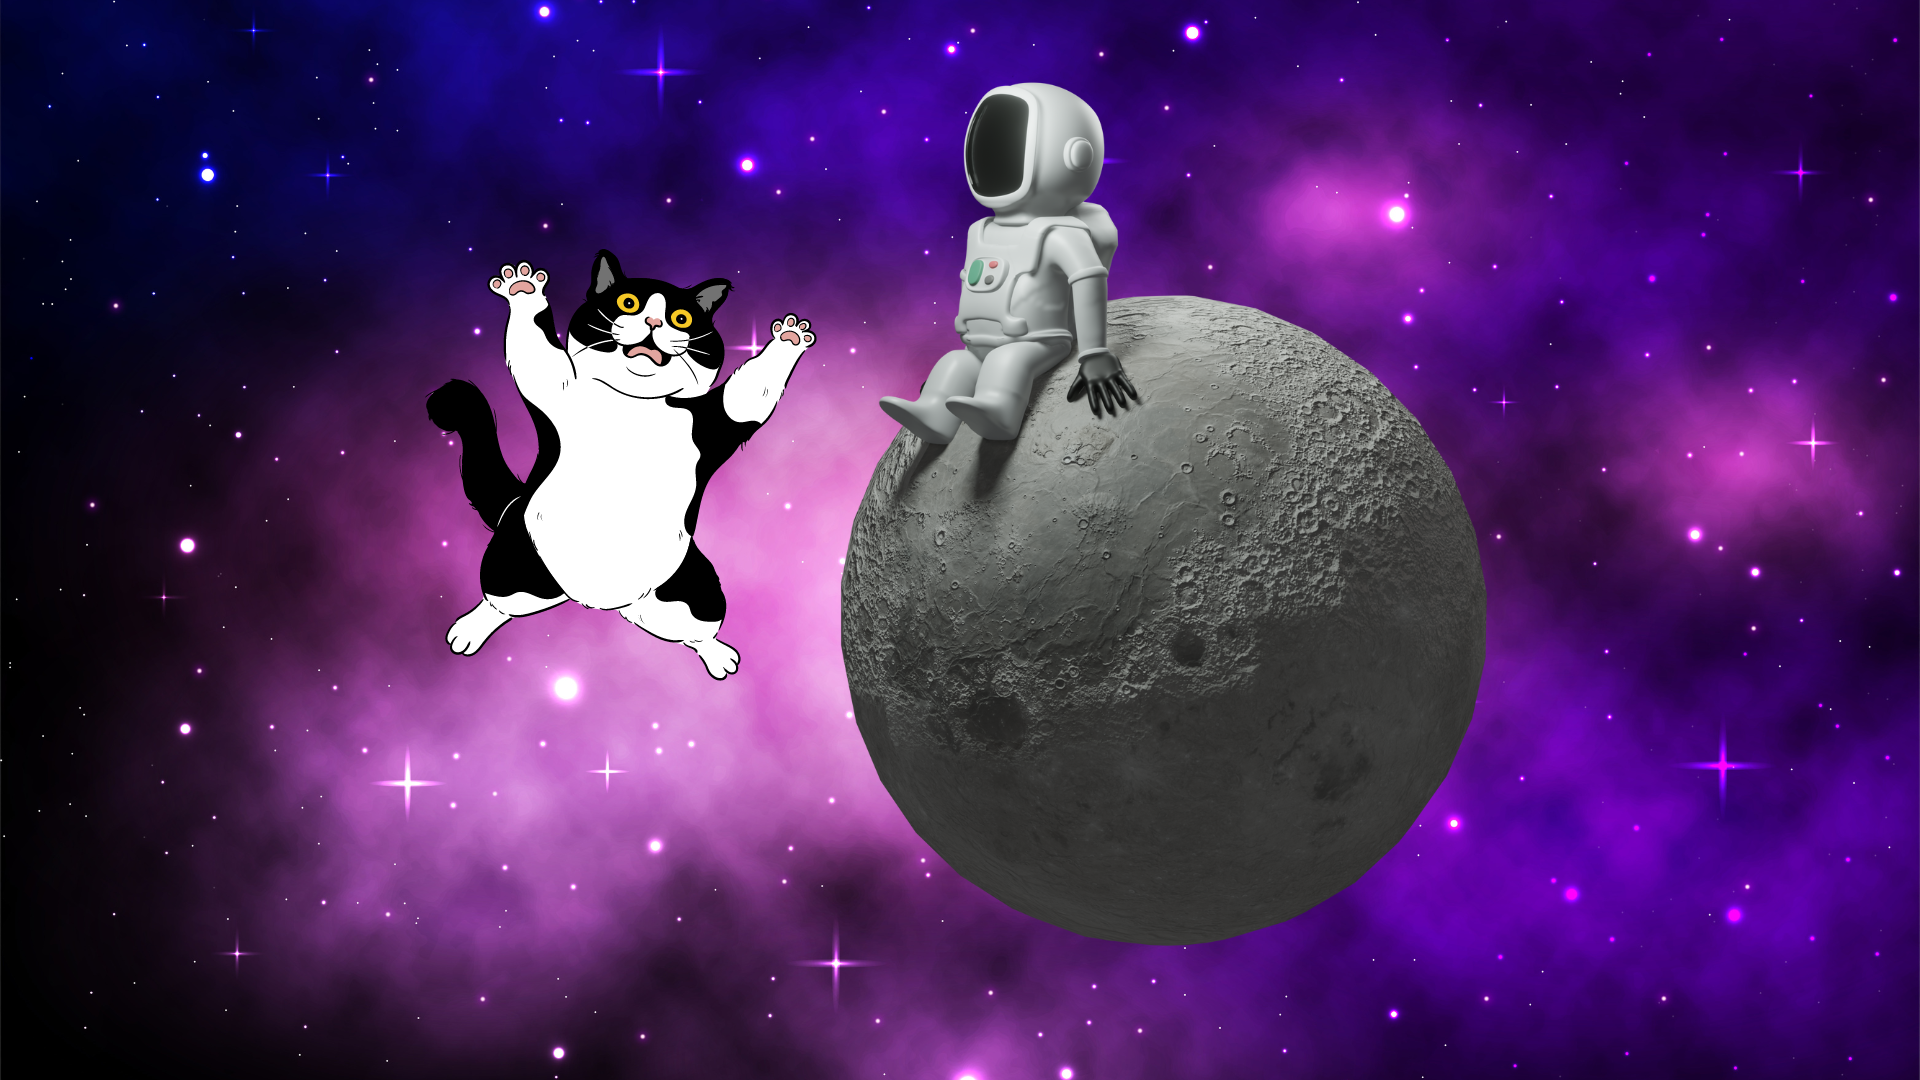 Can Cats Jump Over the Moon? Blending Emerging Technologies and Business for Lunar Exploration